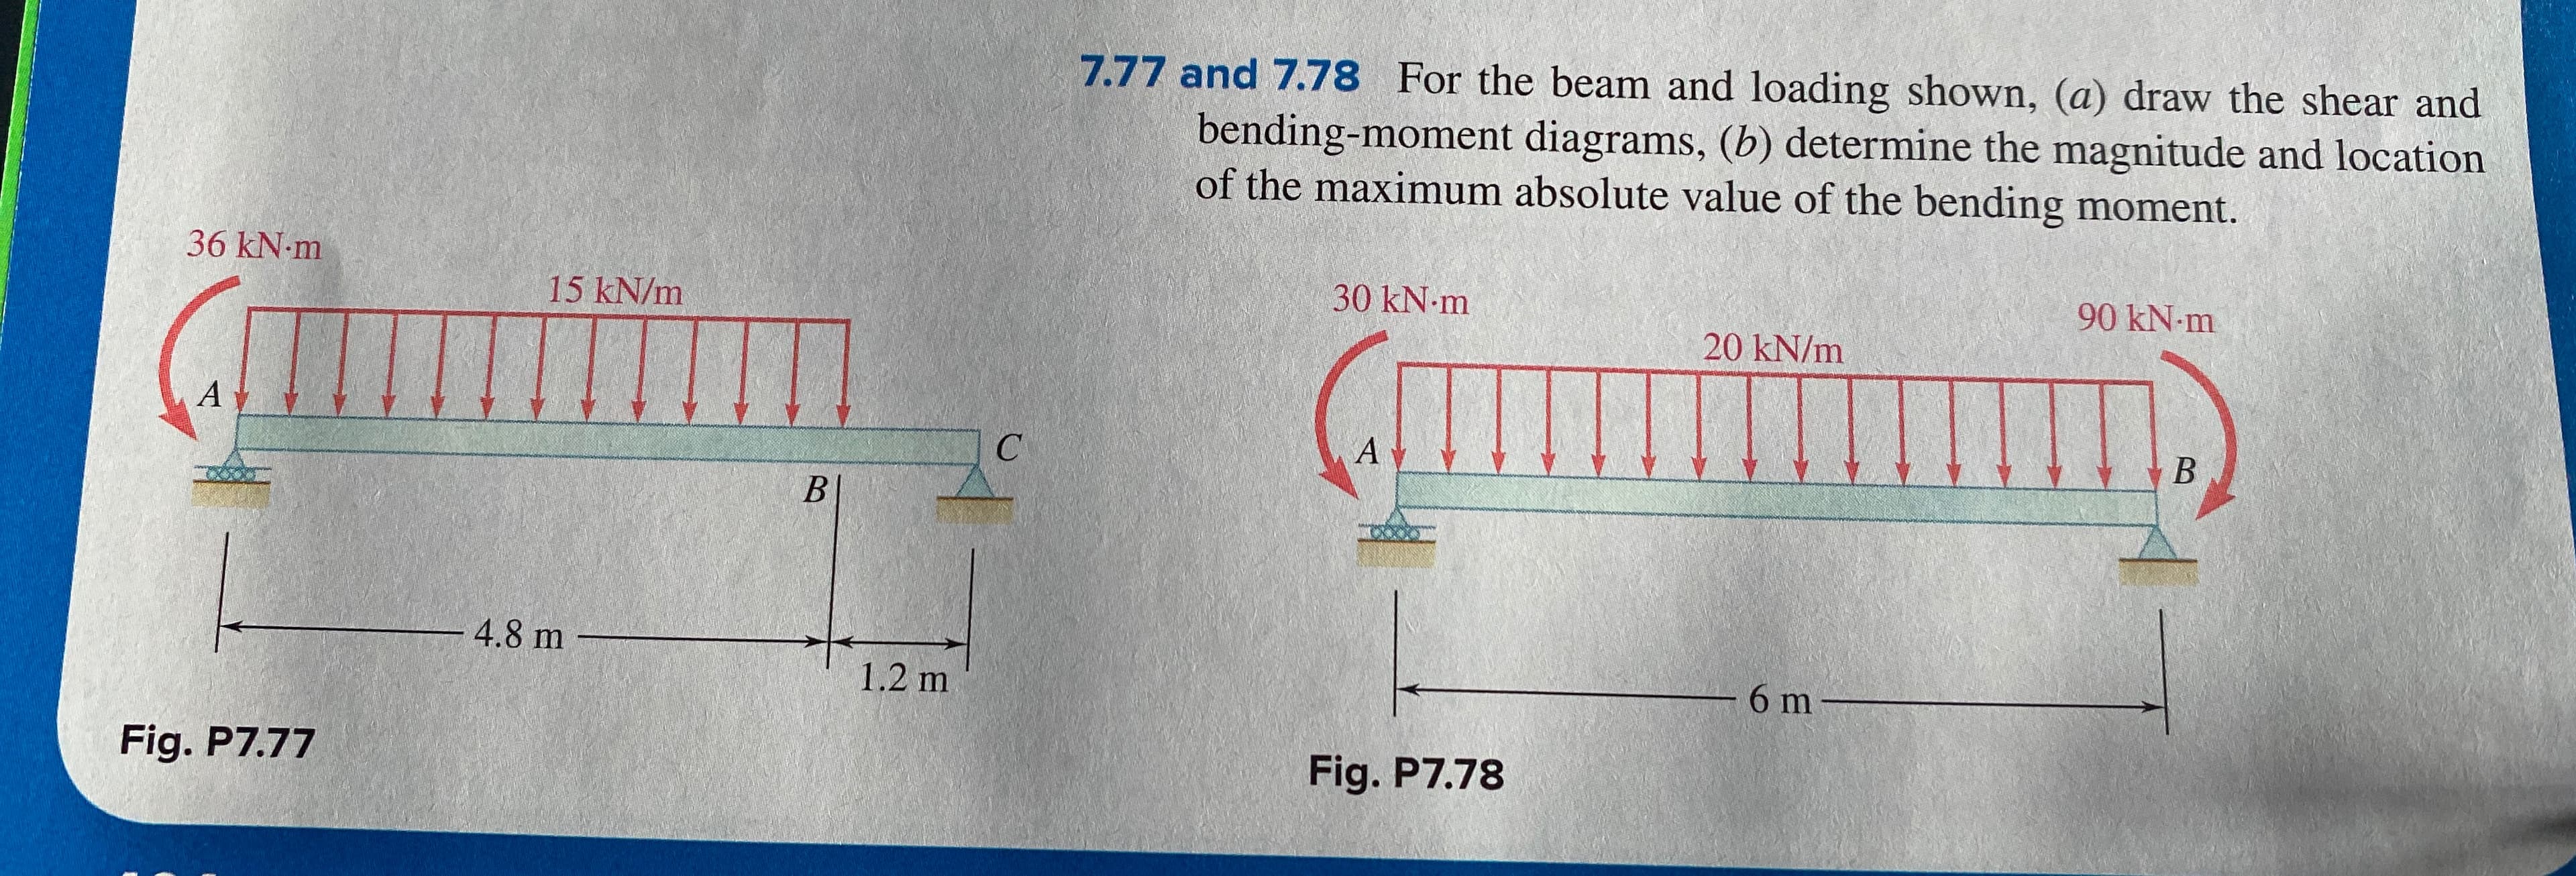 7.77 and 7.78 For the beam and loading shown, (a) draw the shear and
bending-moment diagrams, (b) determine the magnitude and location
of the maximum absolute value of the bending moment.
